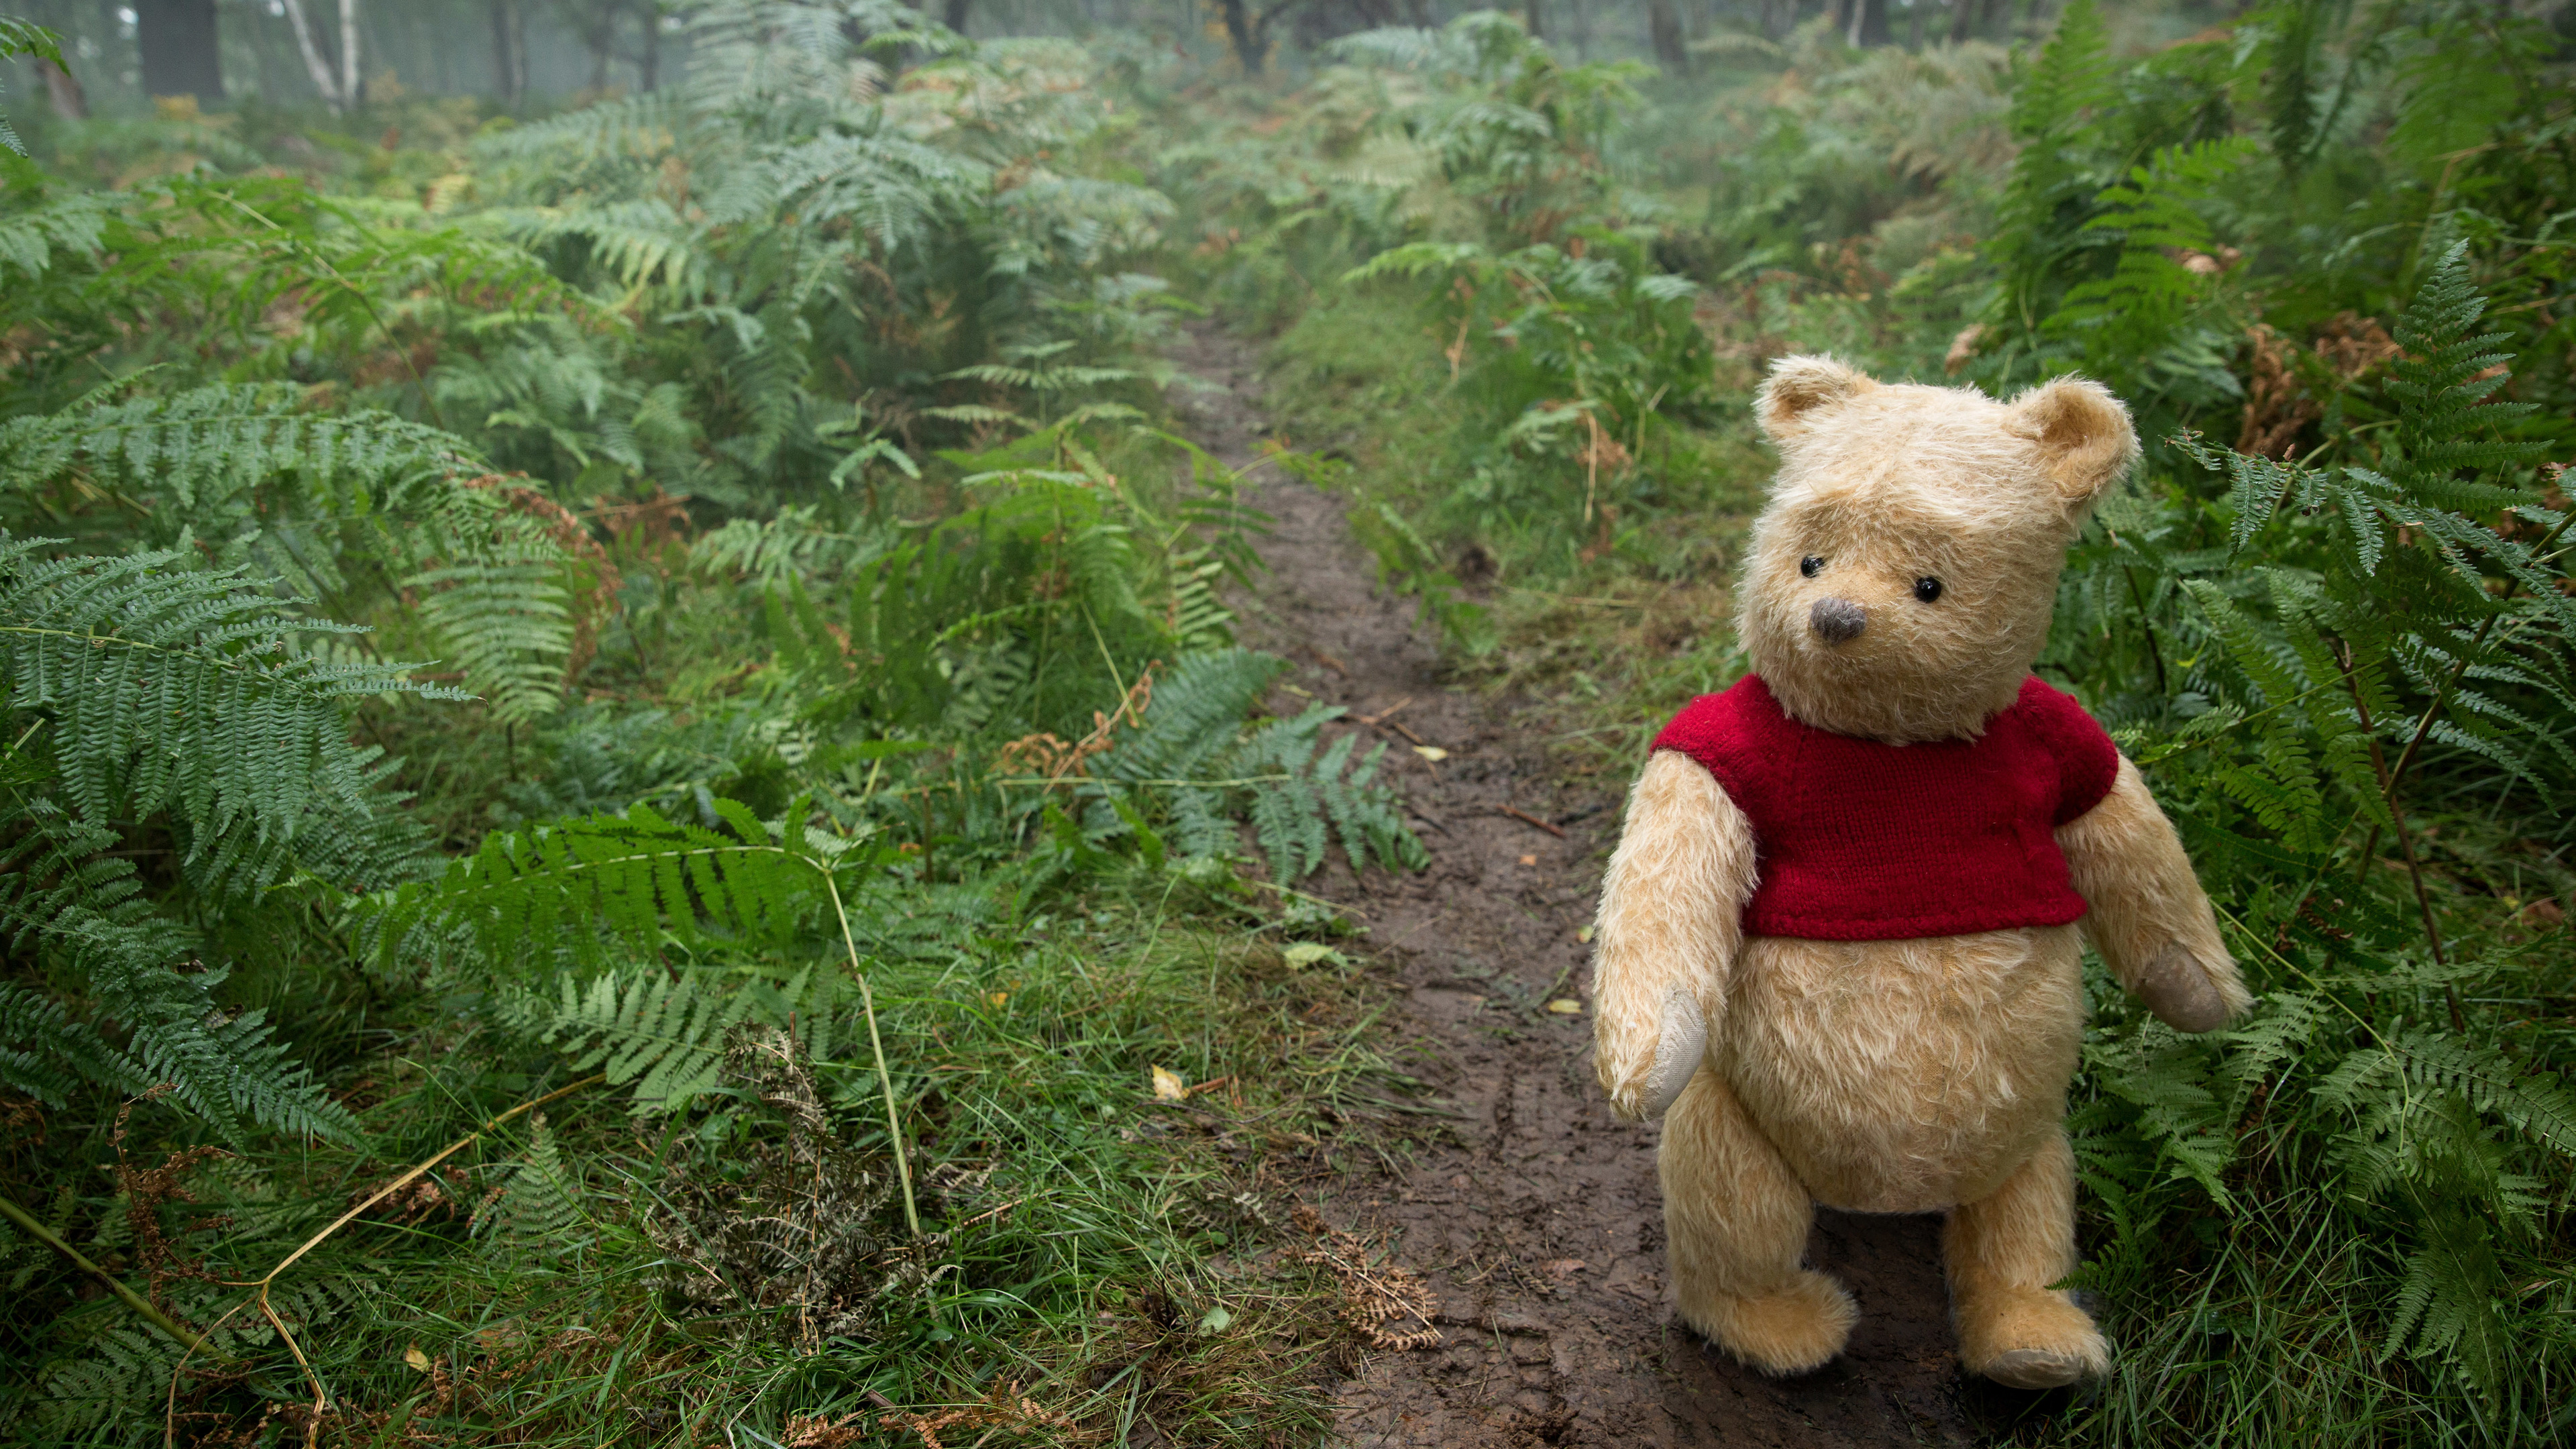 Winnie The Pooh In Christopher Robin Movie 5k 2018 - Christopher Robin - HD Wallpaper 